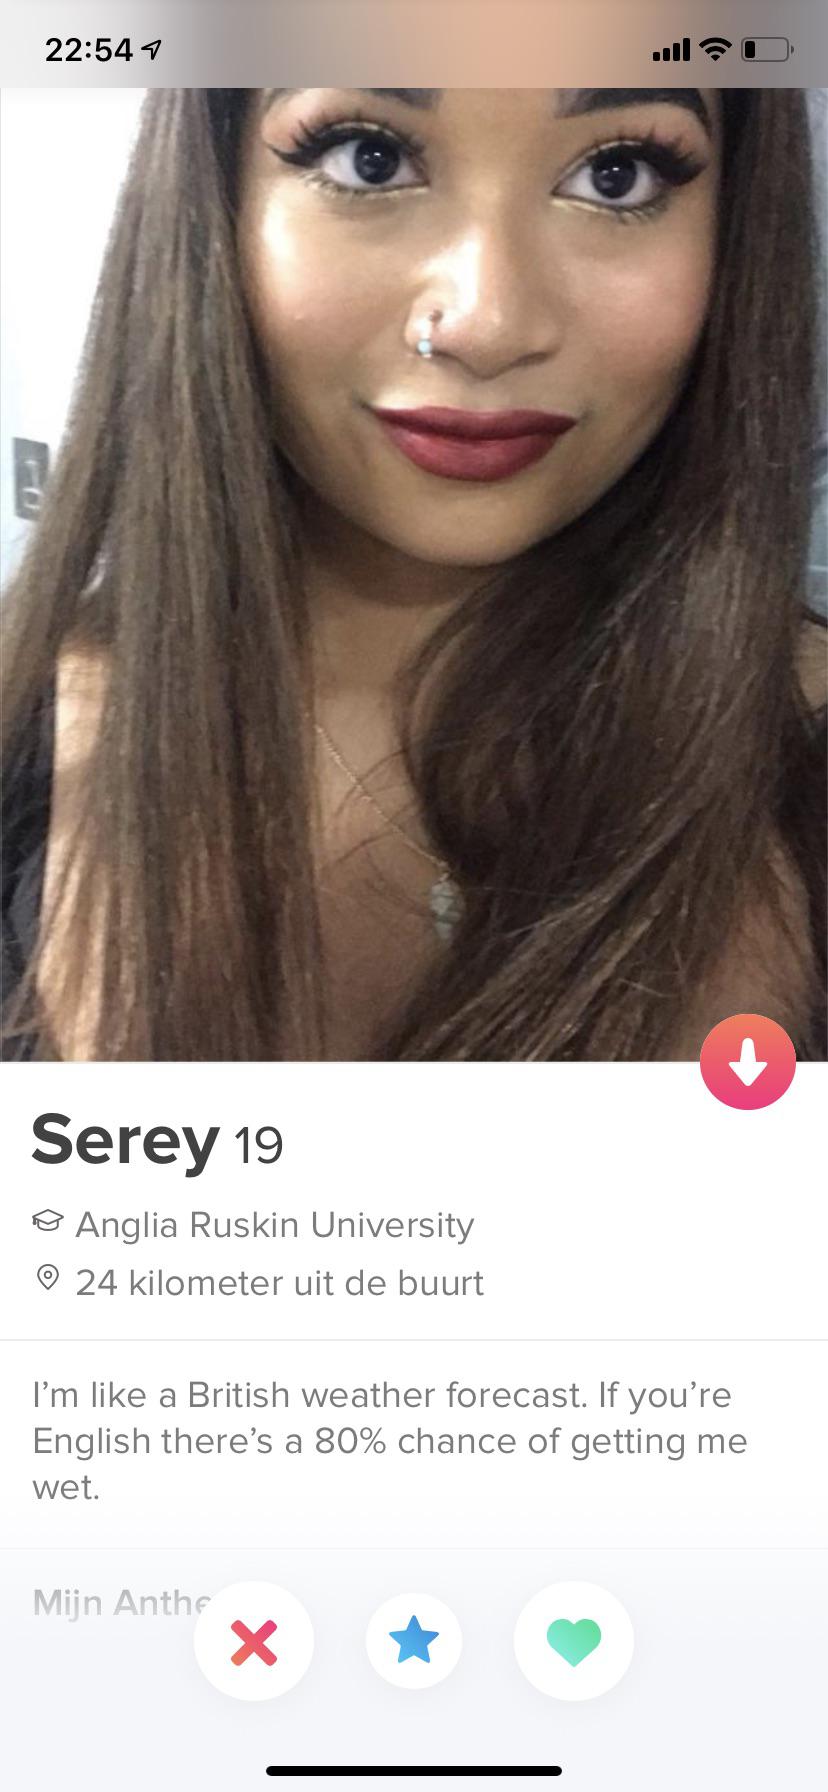 tinder - lip - 1 Serey 19 Anglia Ruskin University 24 kilometer uit de buurt I'm a British weather forecast. If you're English there's a 80% chance of getting me wet. Mijn Anthe